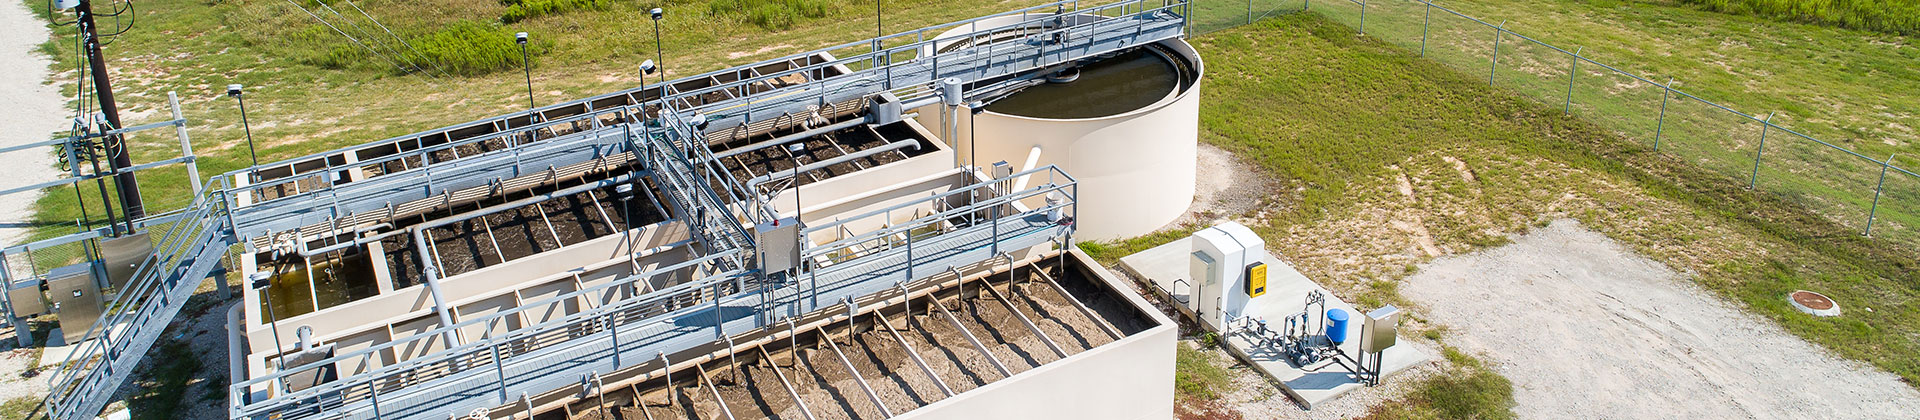 Decentralized Wastewater Treatment System